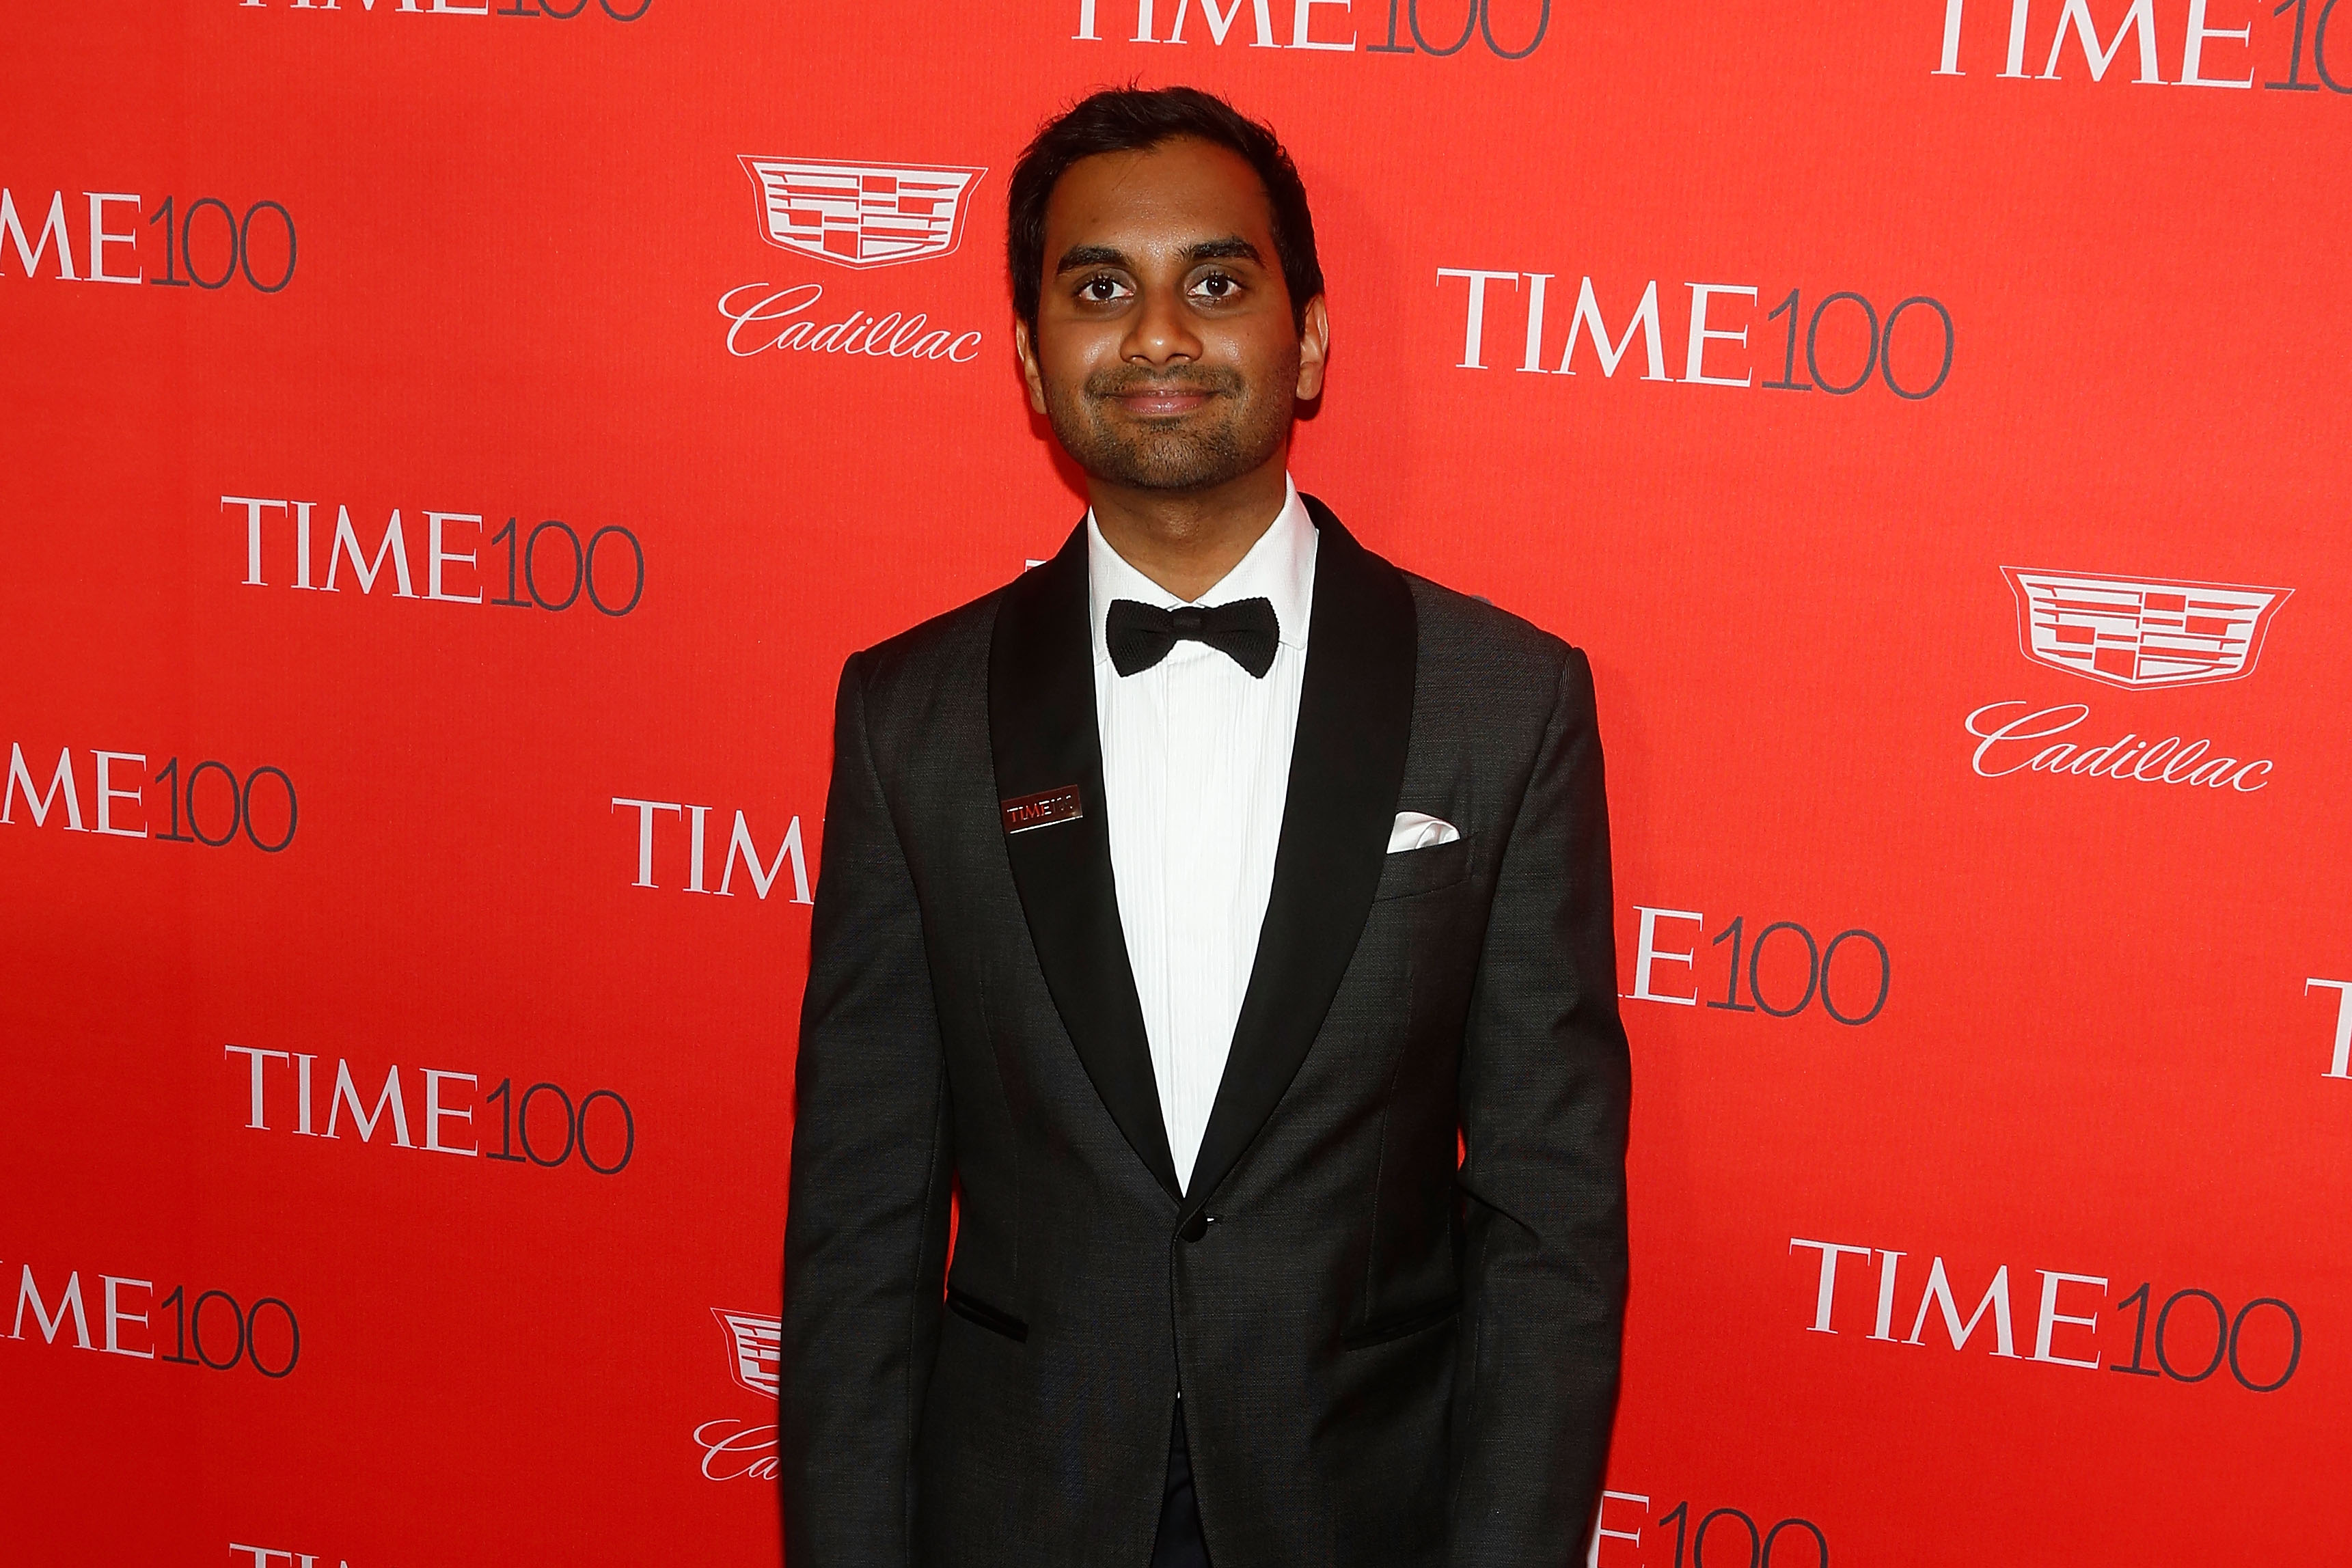 Comedian Aziz Ansari attends the 2016 Time 100 Gala at Lincoln Center on April 26, 2016 in New York City. (Taylor Hill—FilmMagic)